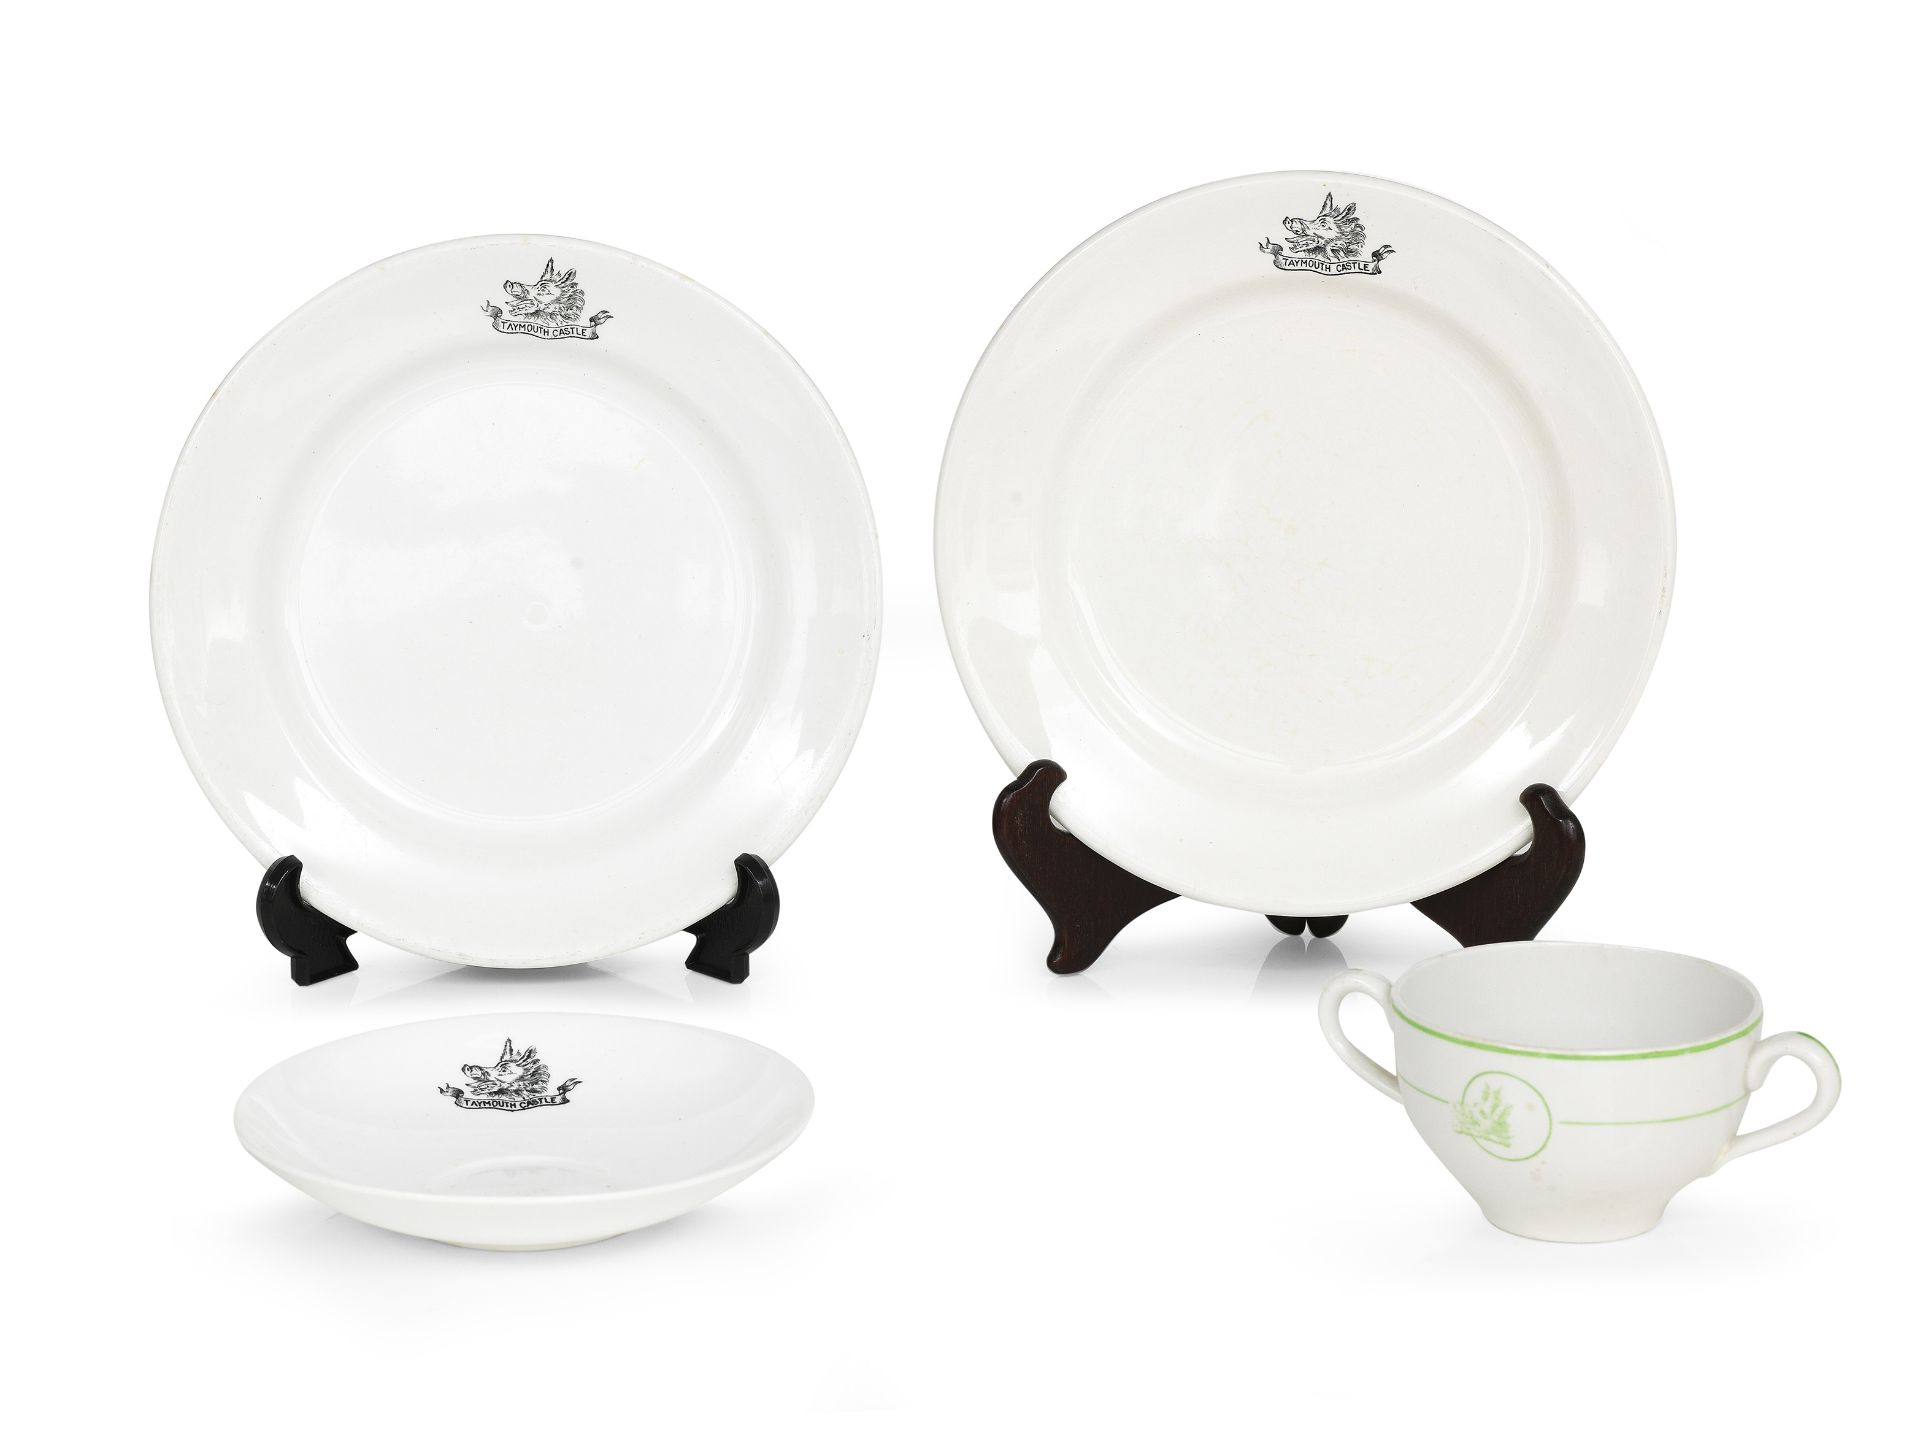 Of Taymouth Castle Interest: A collection of commercial dinner wares 20th century